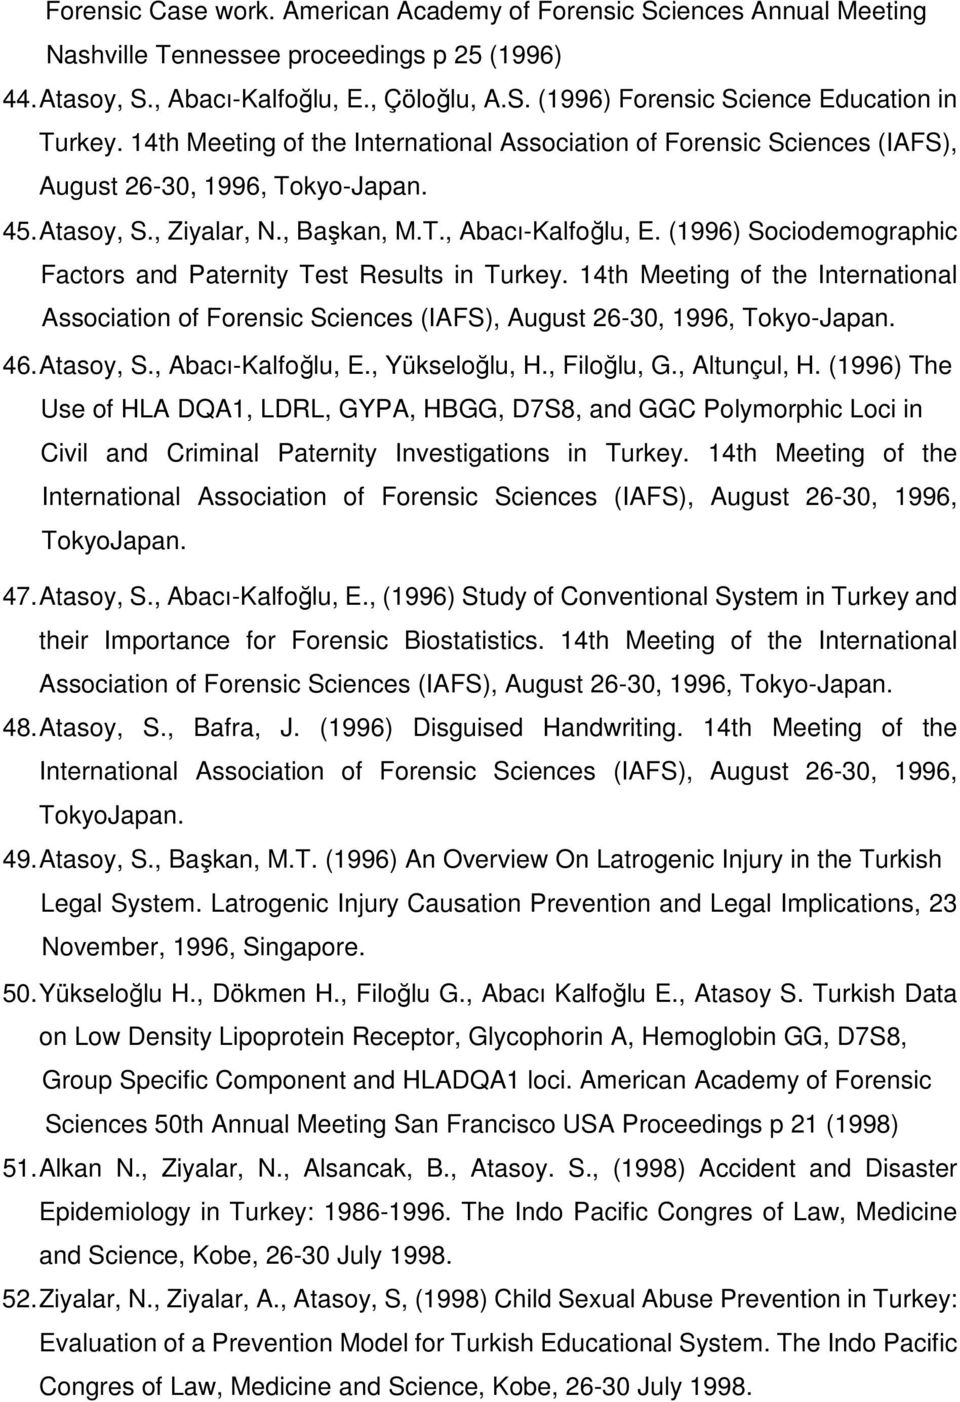 (1996) Sociodemographic Factors and Paternity Test Results in Turkey. 14th Meeting of the International Association of Forensic Sciences (IAFS), August 26-30, 1996, Tokyo-Japan. 46. Atasoy, S.